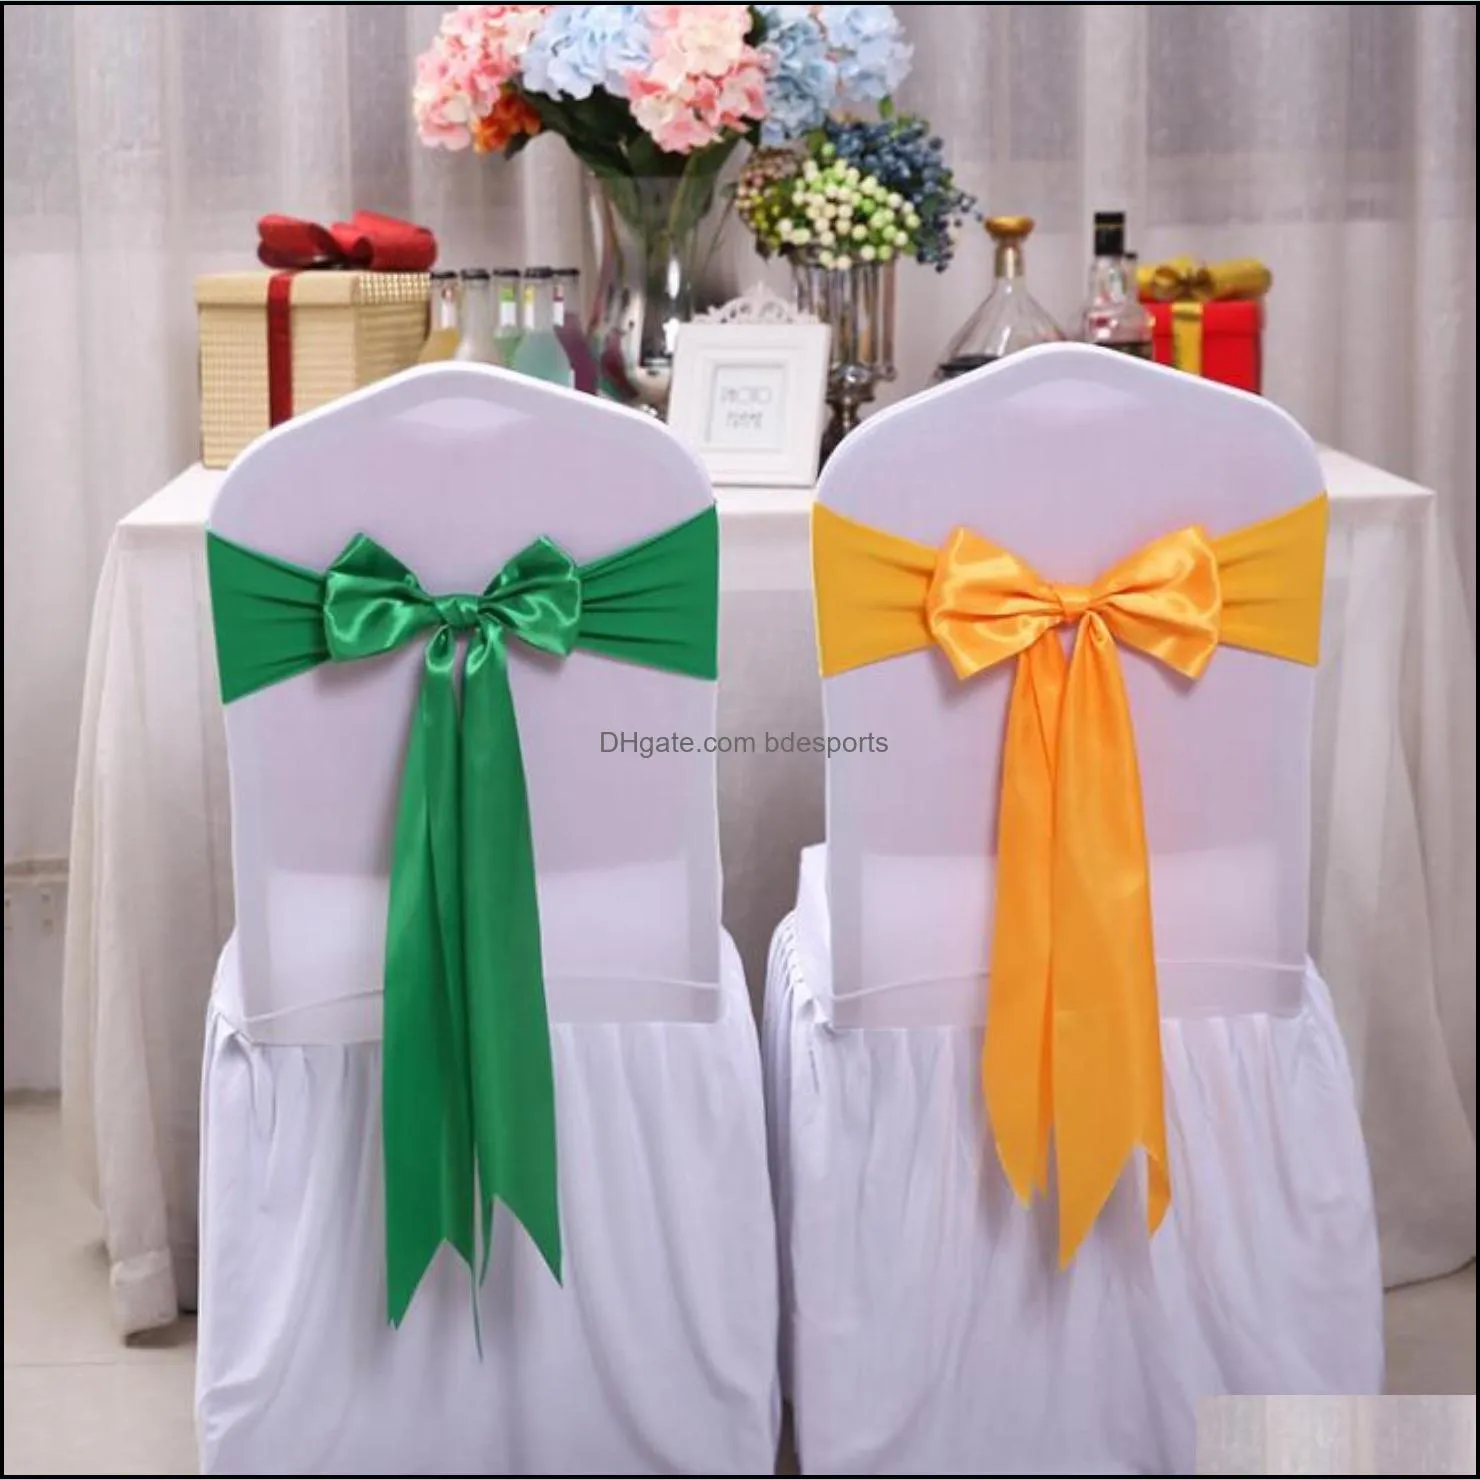 Ers Textiles Home & Garden25Pcs Wedding Decoration Knot Bow Sashes Satin Spandex Er Band Ribbons Chair Tie Backs For Party Banqu Jllkdk